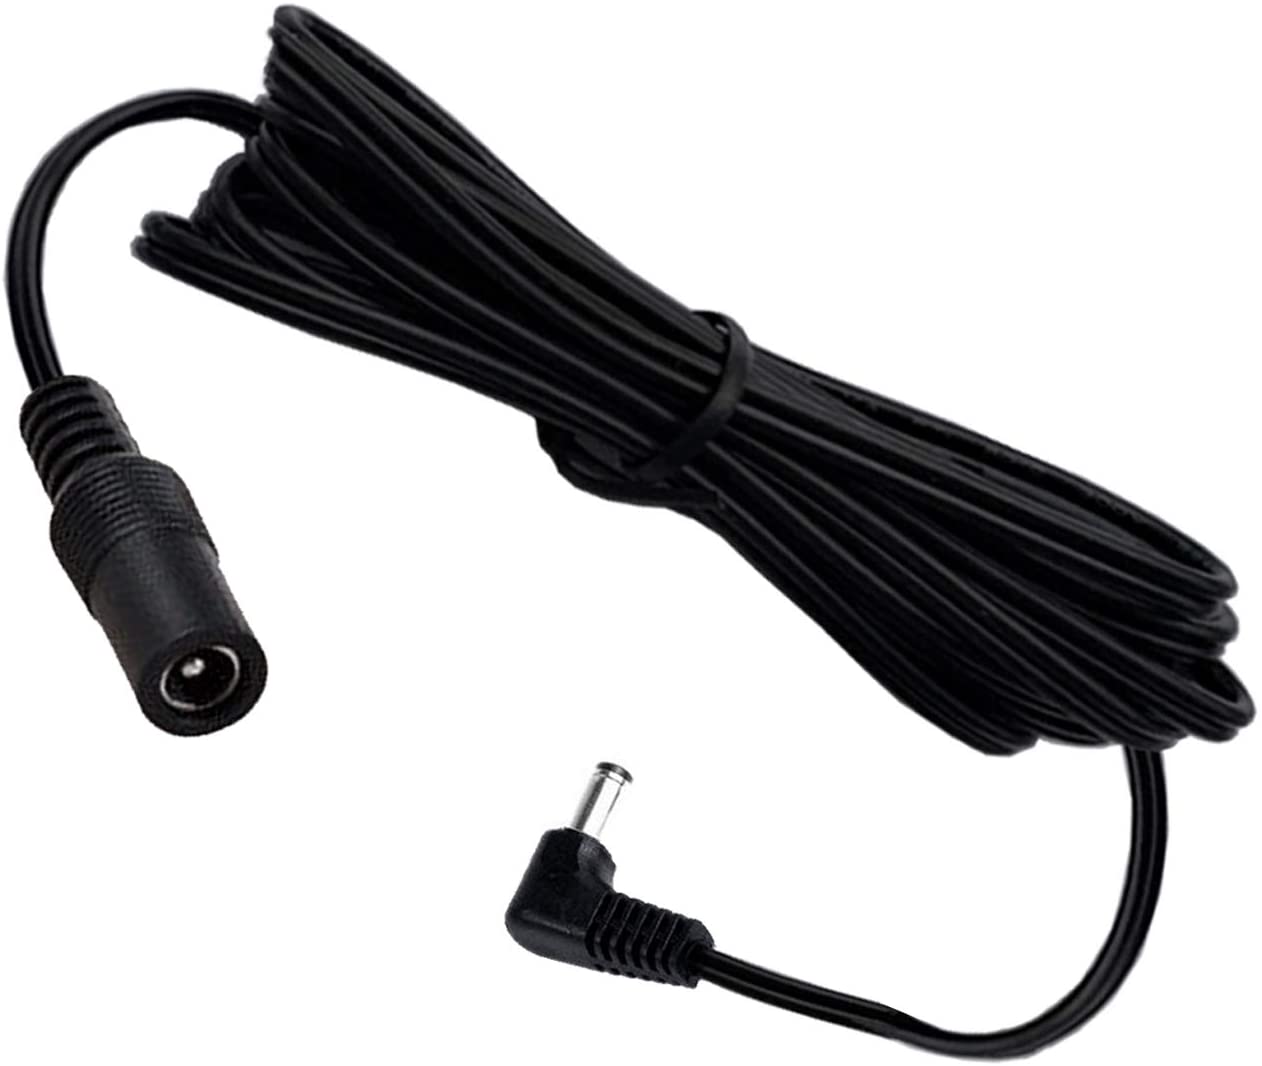 UPBRIGHT NEW 6' Feet 1.8m Extension Power Cord Conv5525-1.8m Star Trac Fitness STBV 4610 Upright Bike ST4860 Elliptical ST Total Body NEW - image 5 of 5